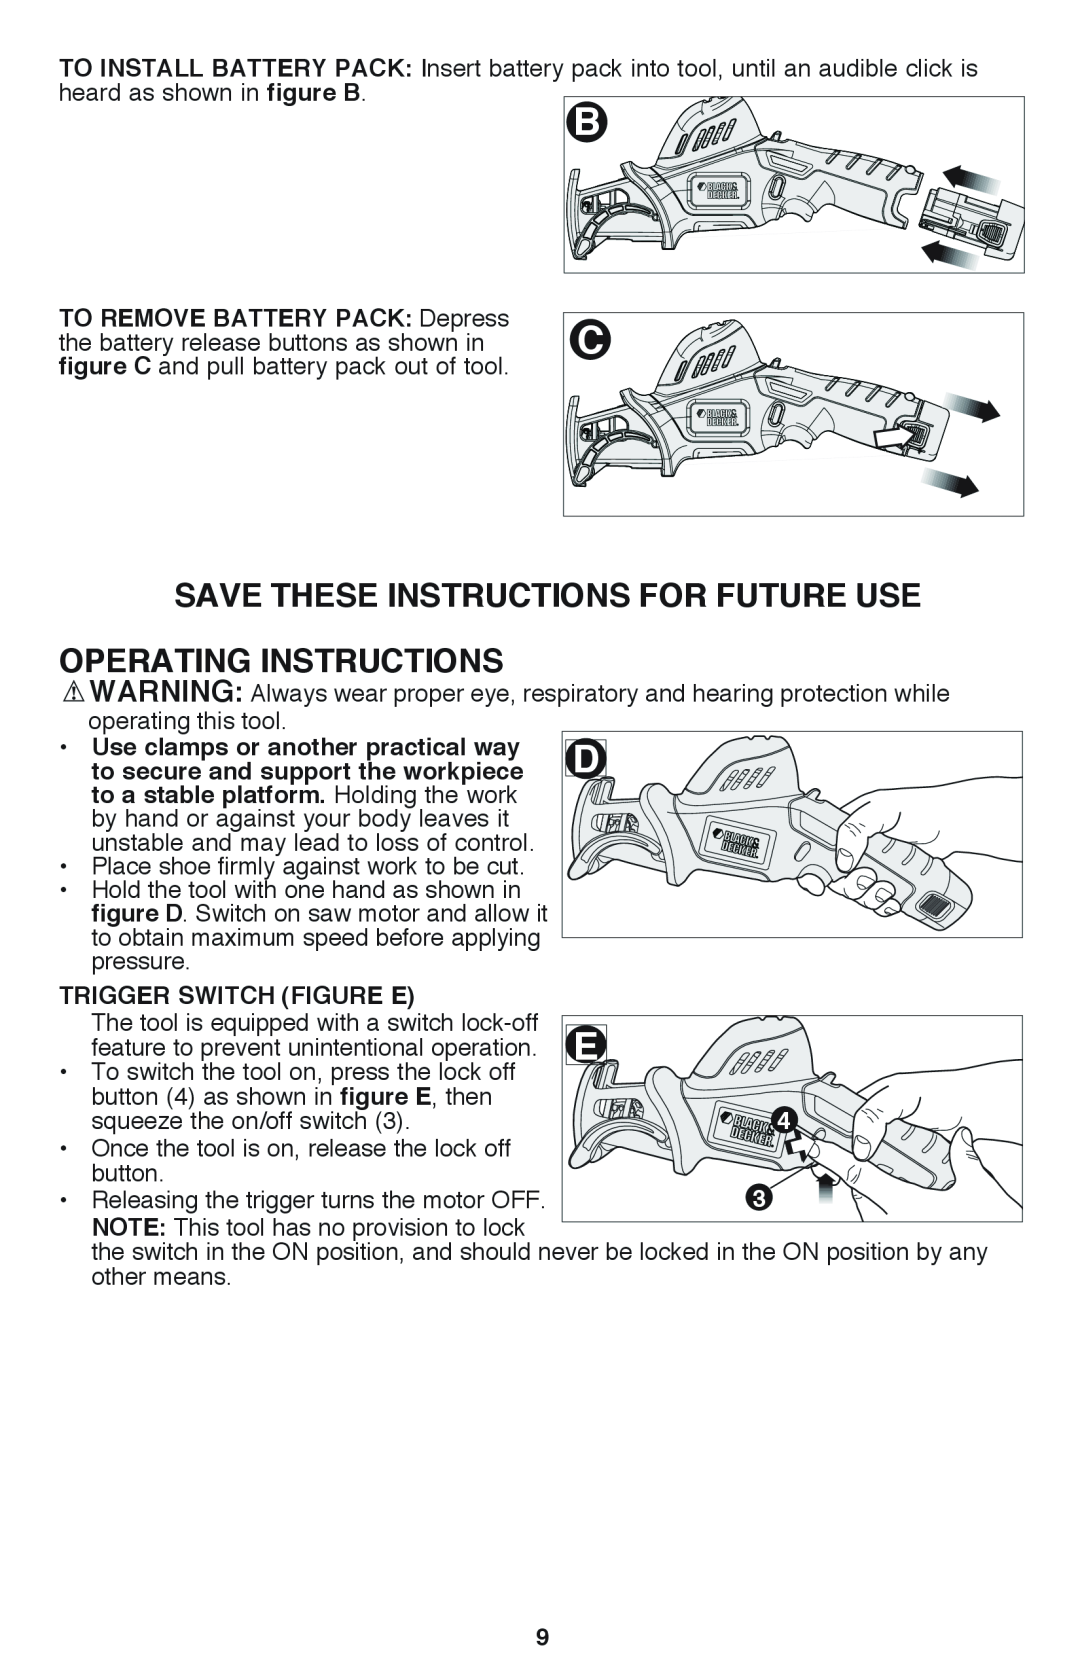 Black & Decker PSL12 instruction manual Save these instructions for future use, OPERATING instructions 